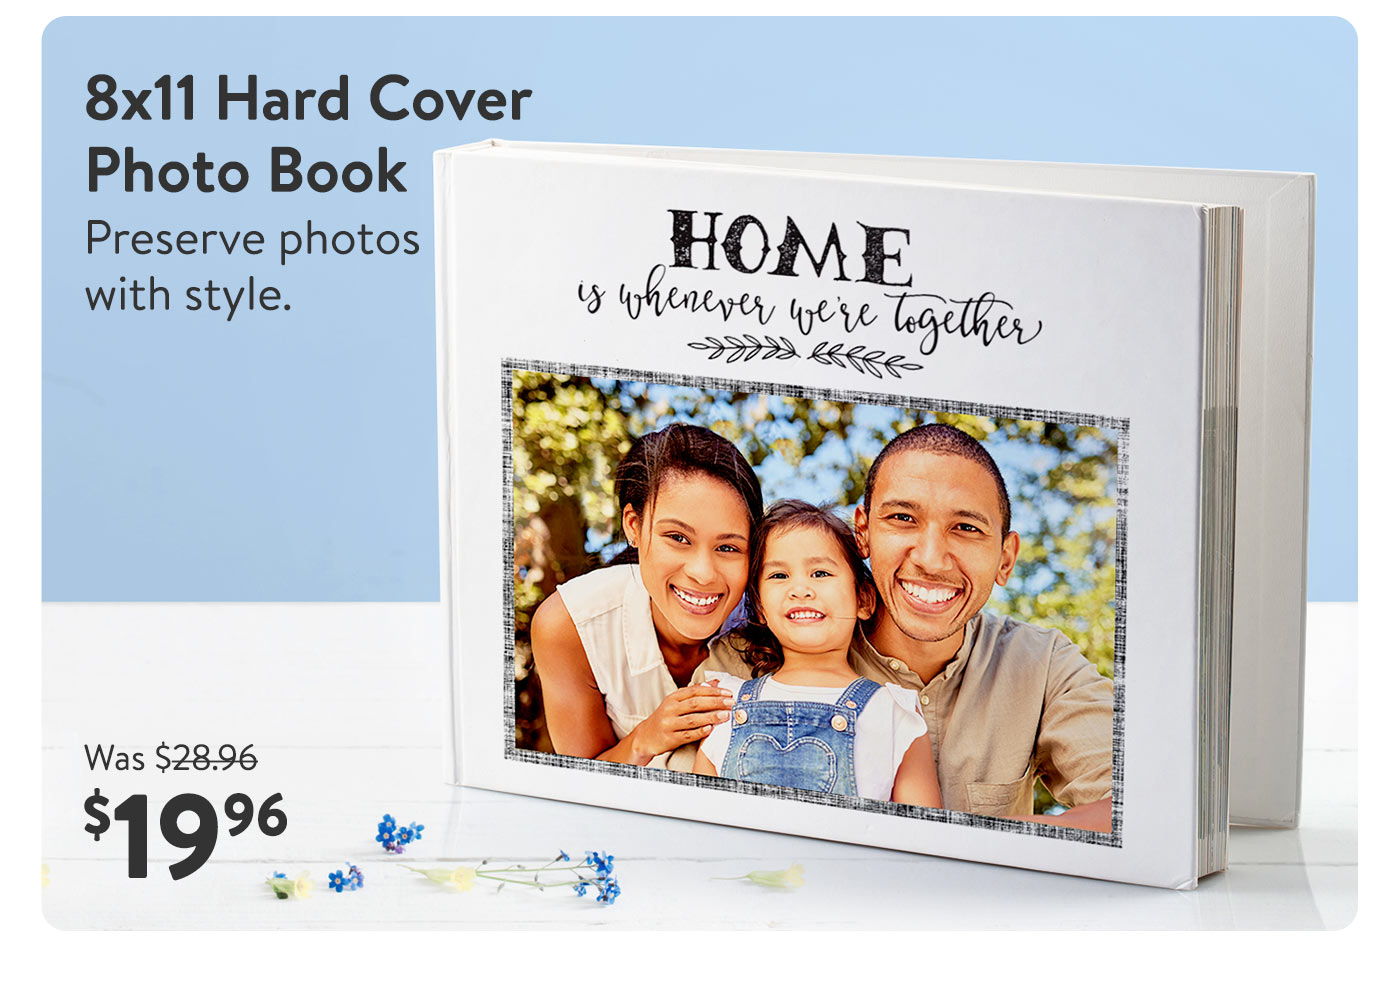 8x11 Hard Cover Photo Book $19.96, was $28.96